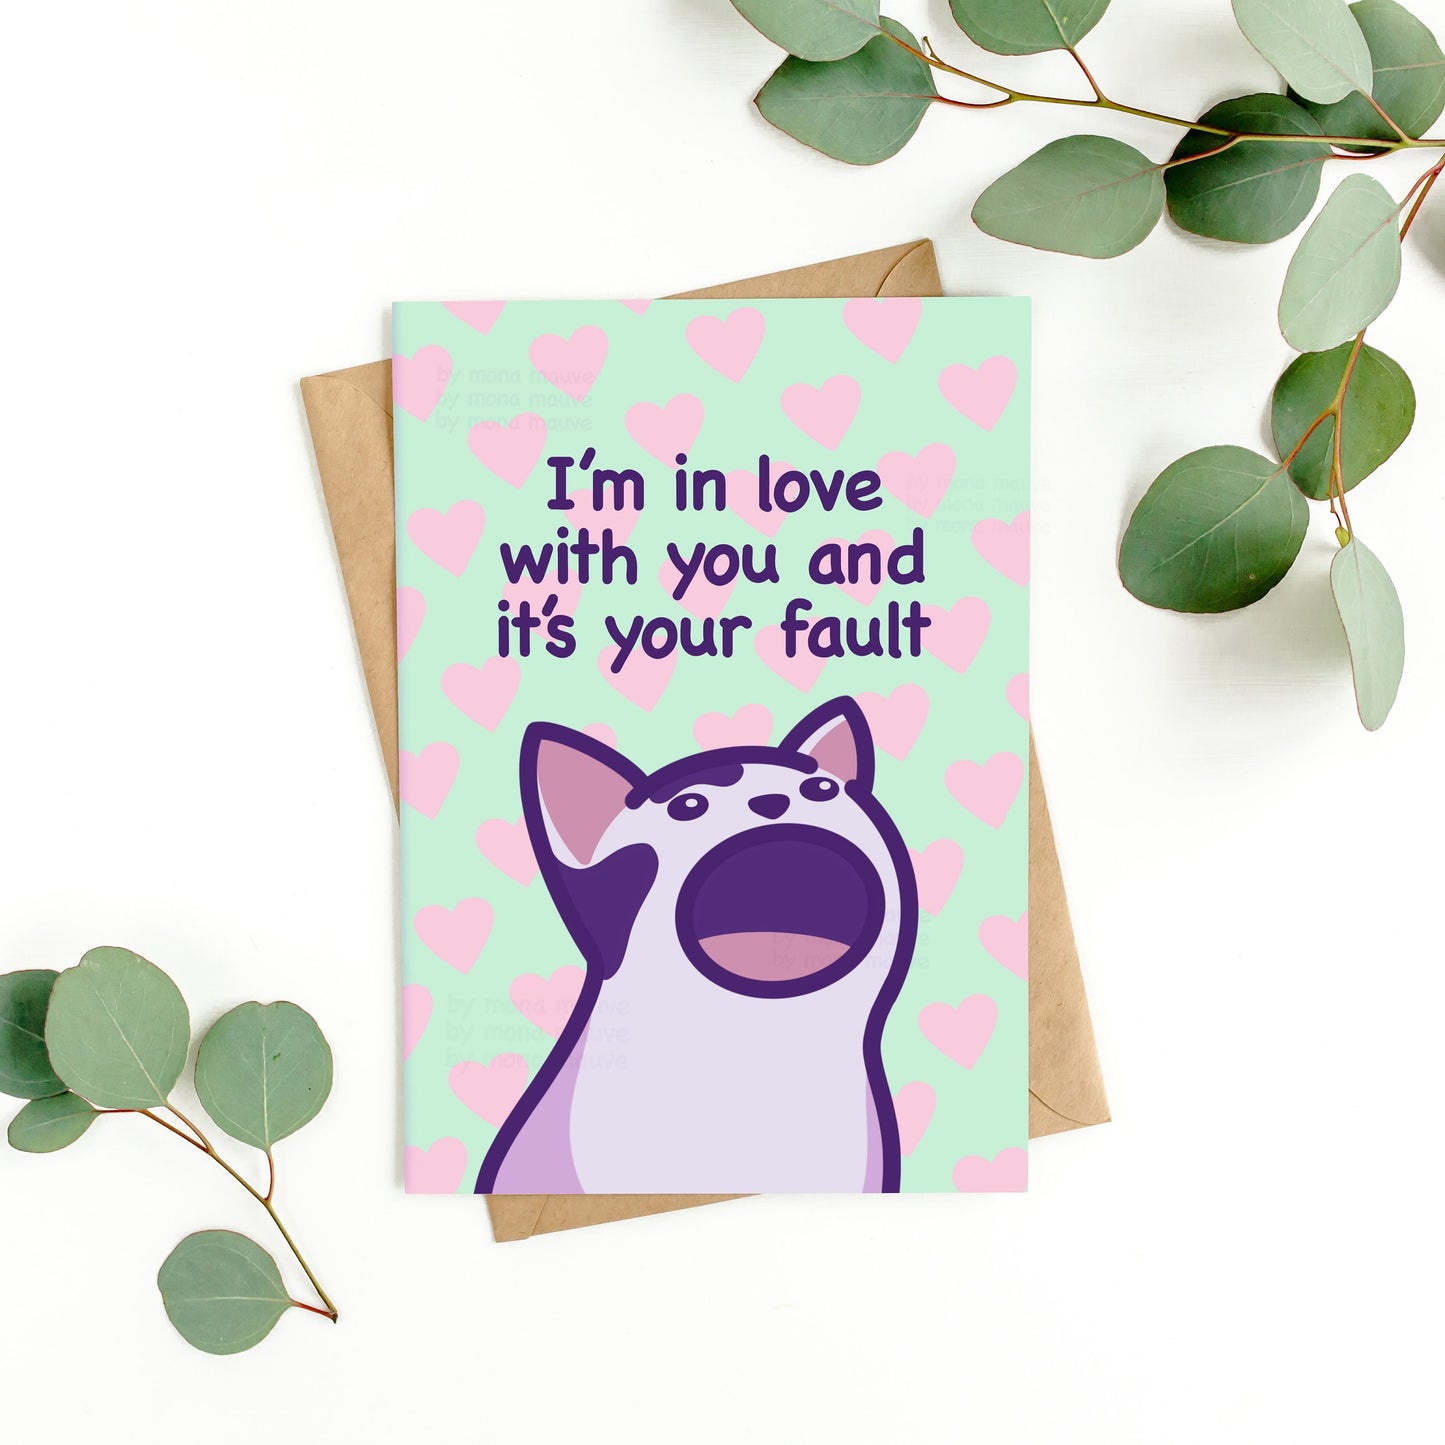 Printable Anniversary Card | Digital Download | Funny Pop Cat Love Card | Card for Husband, Wife, Boyfriend, Girlfriend, Gift for Her or Him